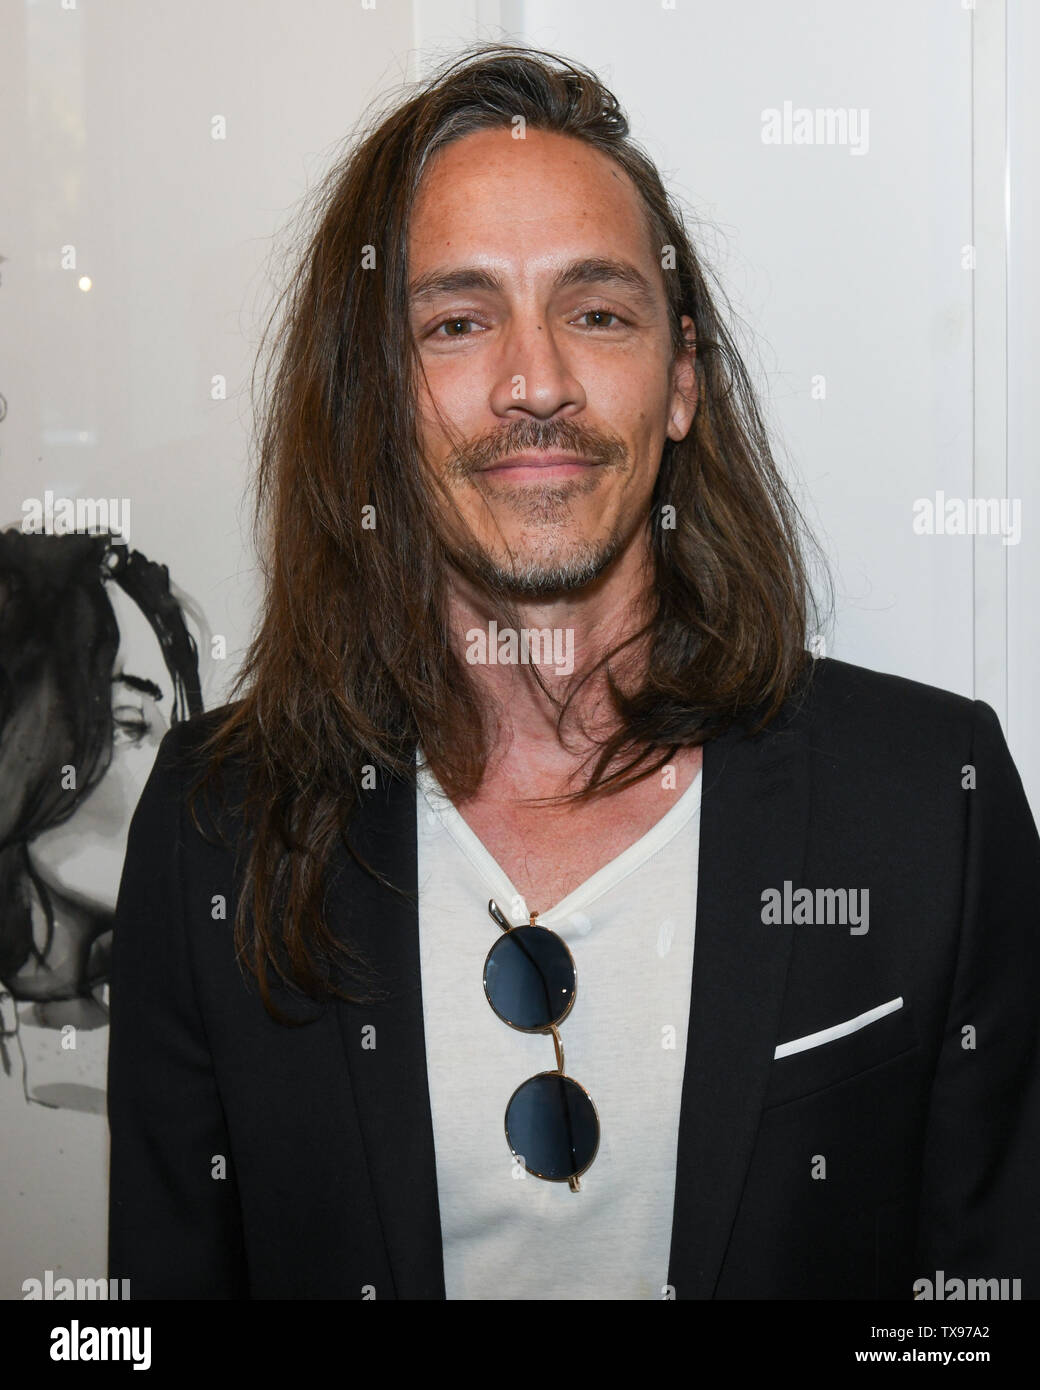 June 23, 2019 - Brandon Boyd with his art work at the 'Love and Art' group show at the Lumber Yard Gallery in Malibu, California. (Credit Image: © Billy Bennight/ZUMA Wire) Stock Photo